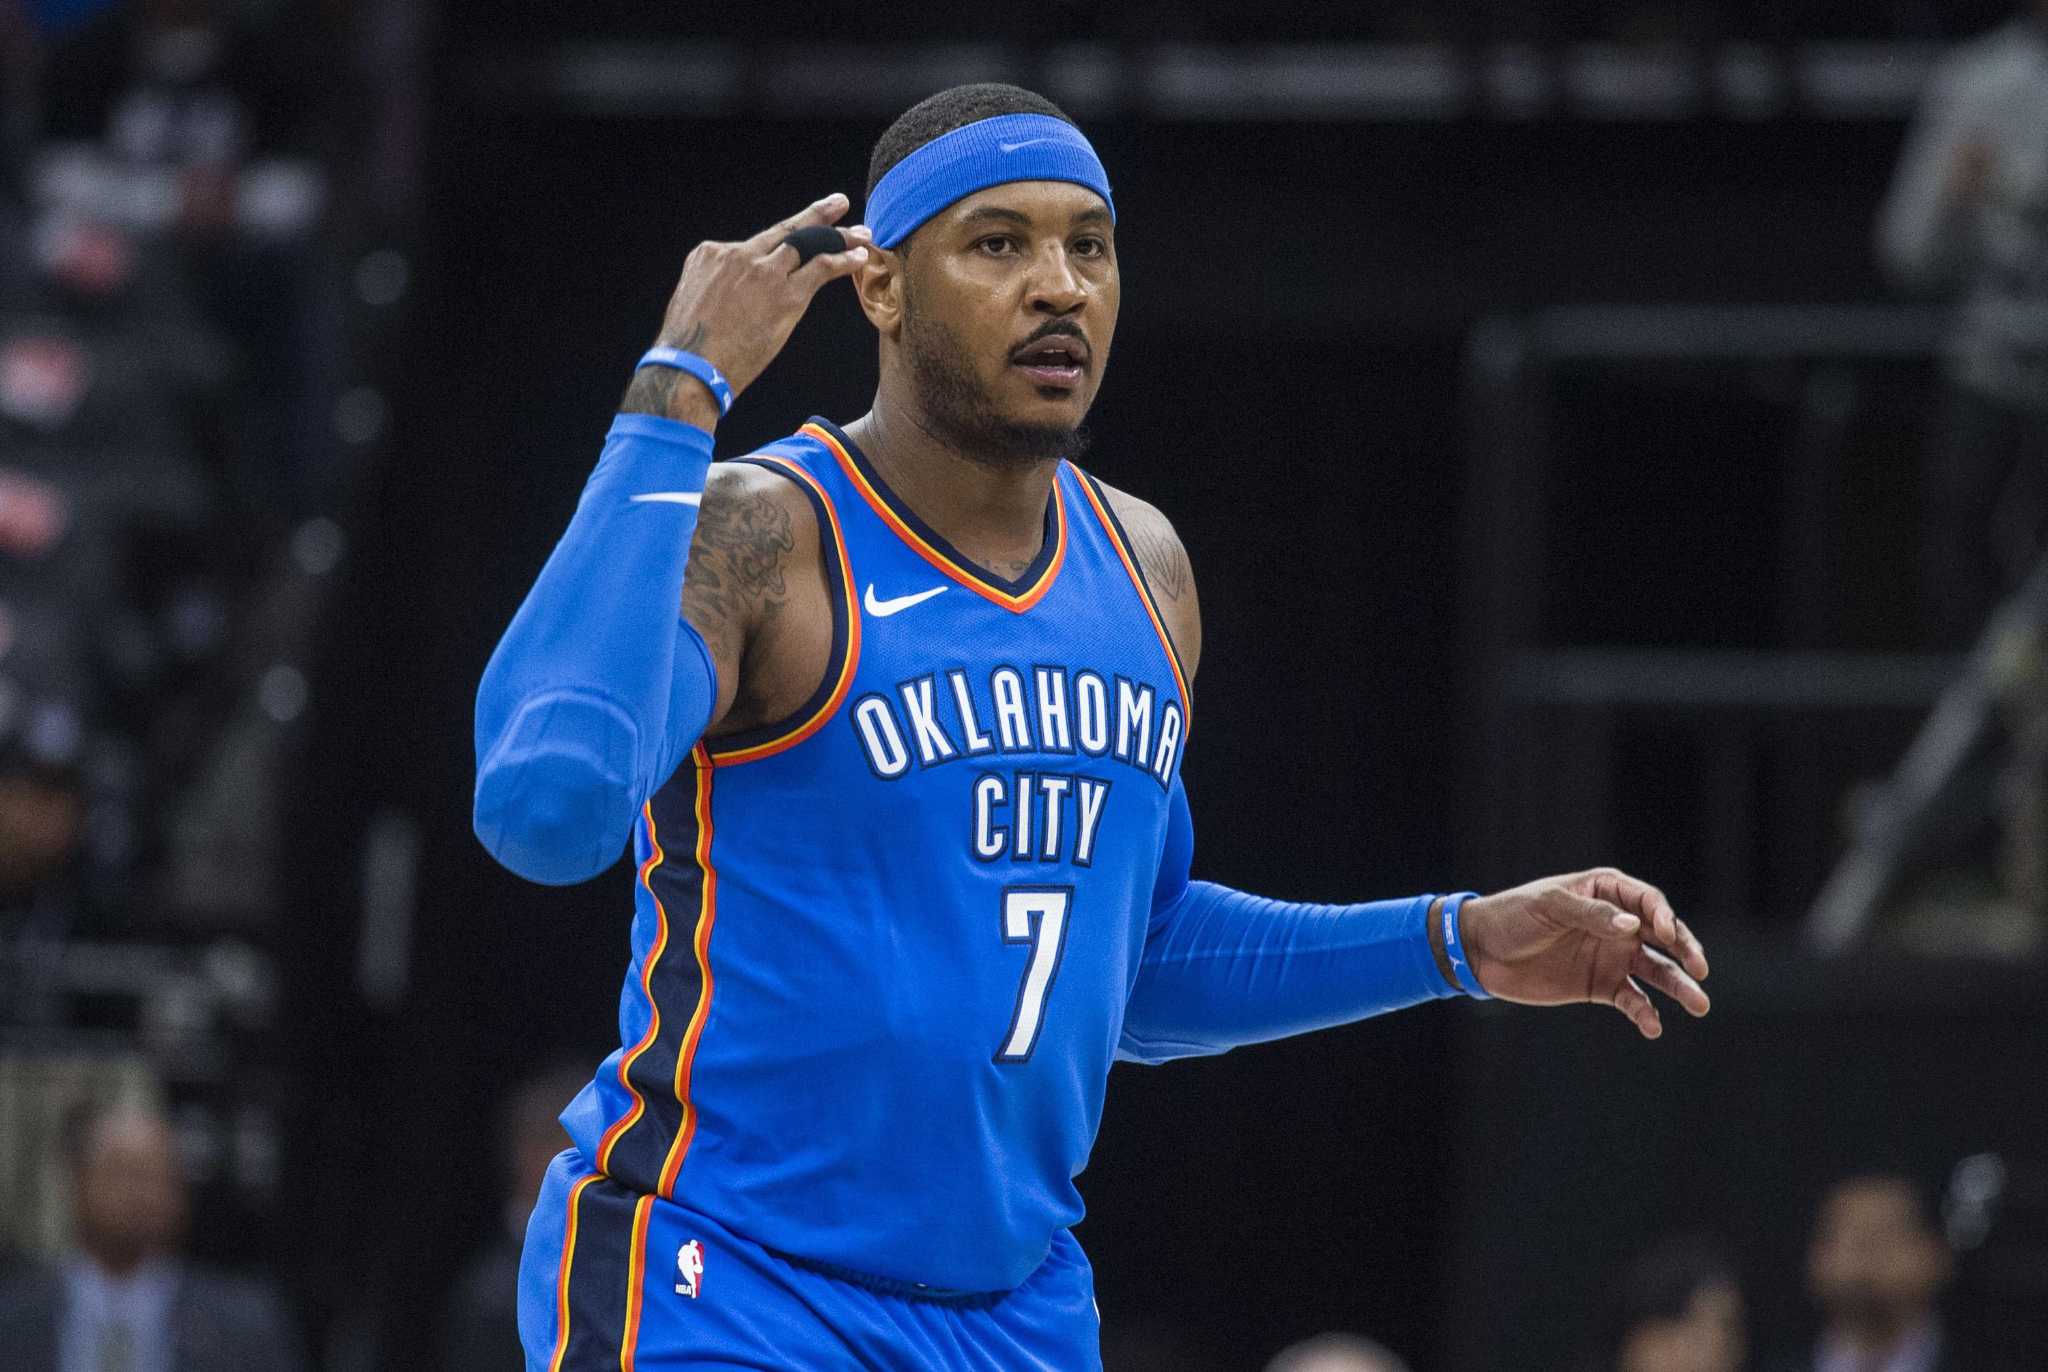 Would Carmelo Anthony Make The Phoenix Suns a Contender